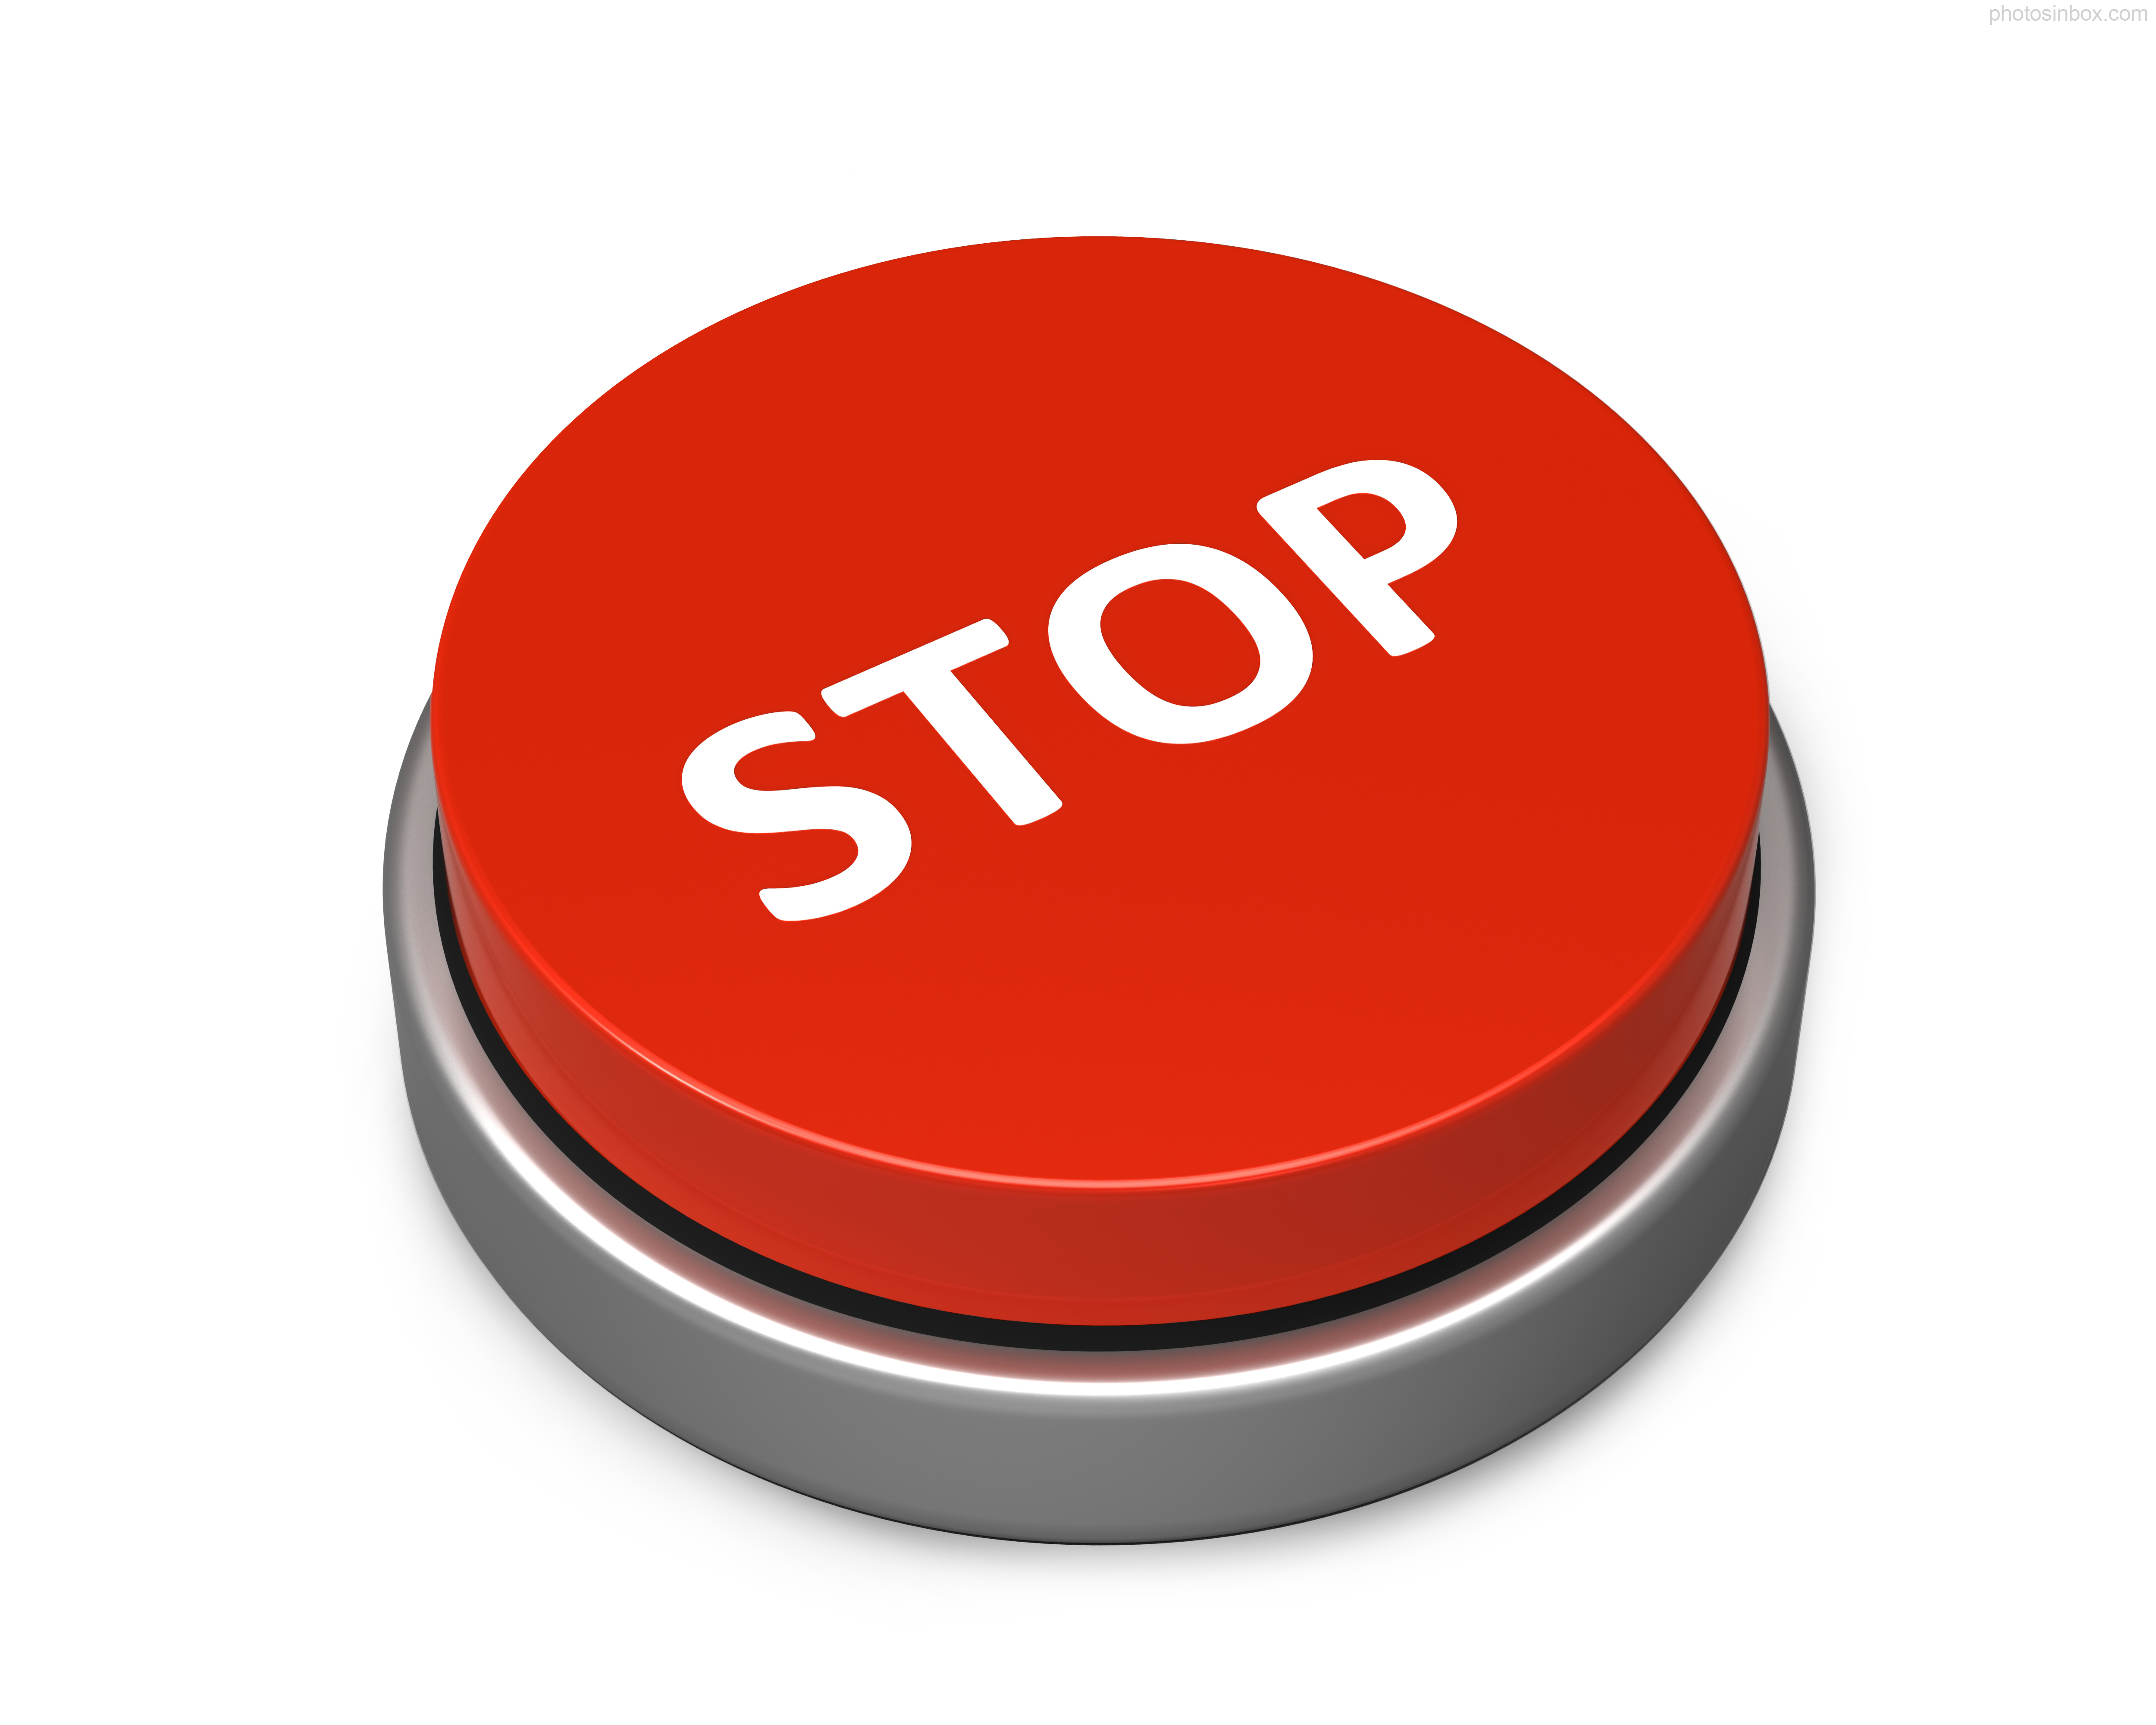 What Happened to the Stop Button? - The Stoner's Journal